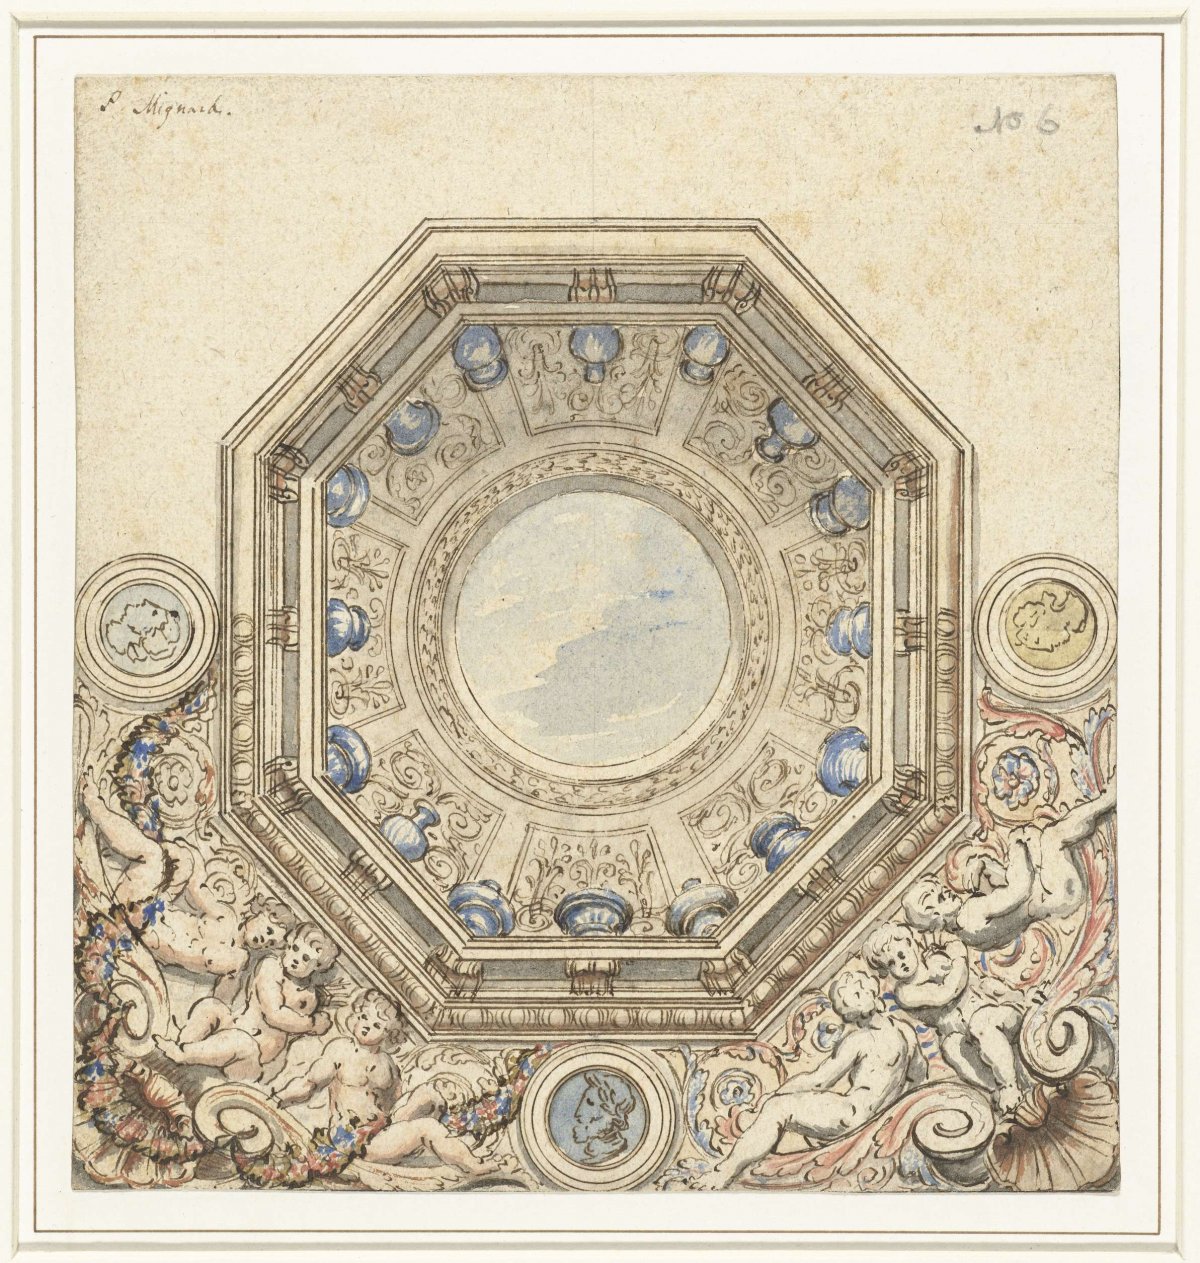 Design for a ceiling with dome, Pierre Mignard (1612-1695), 1622 - 1695